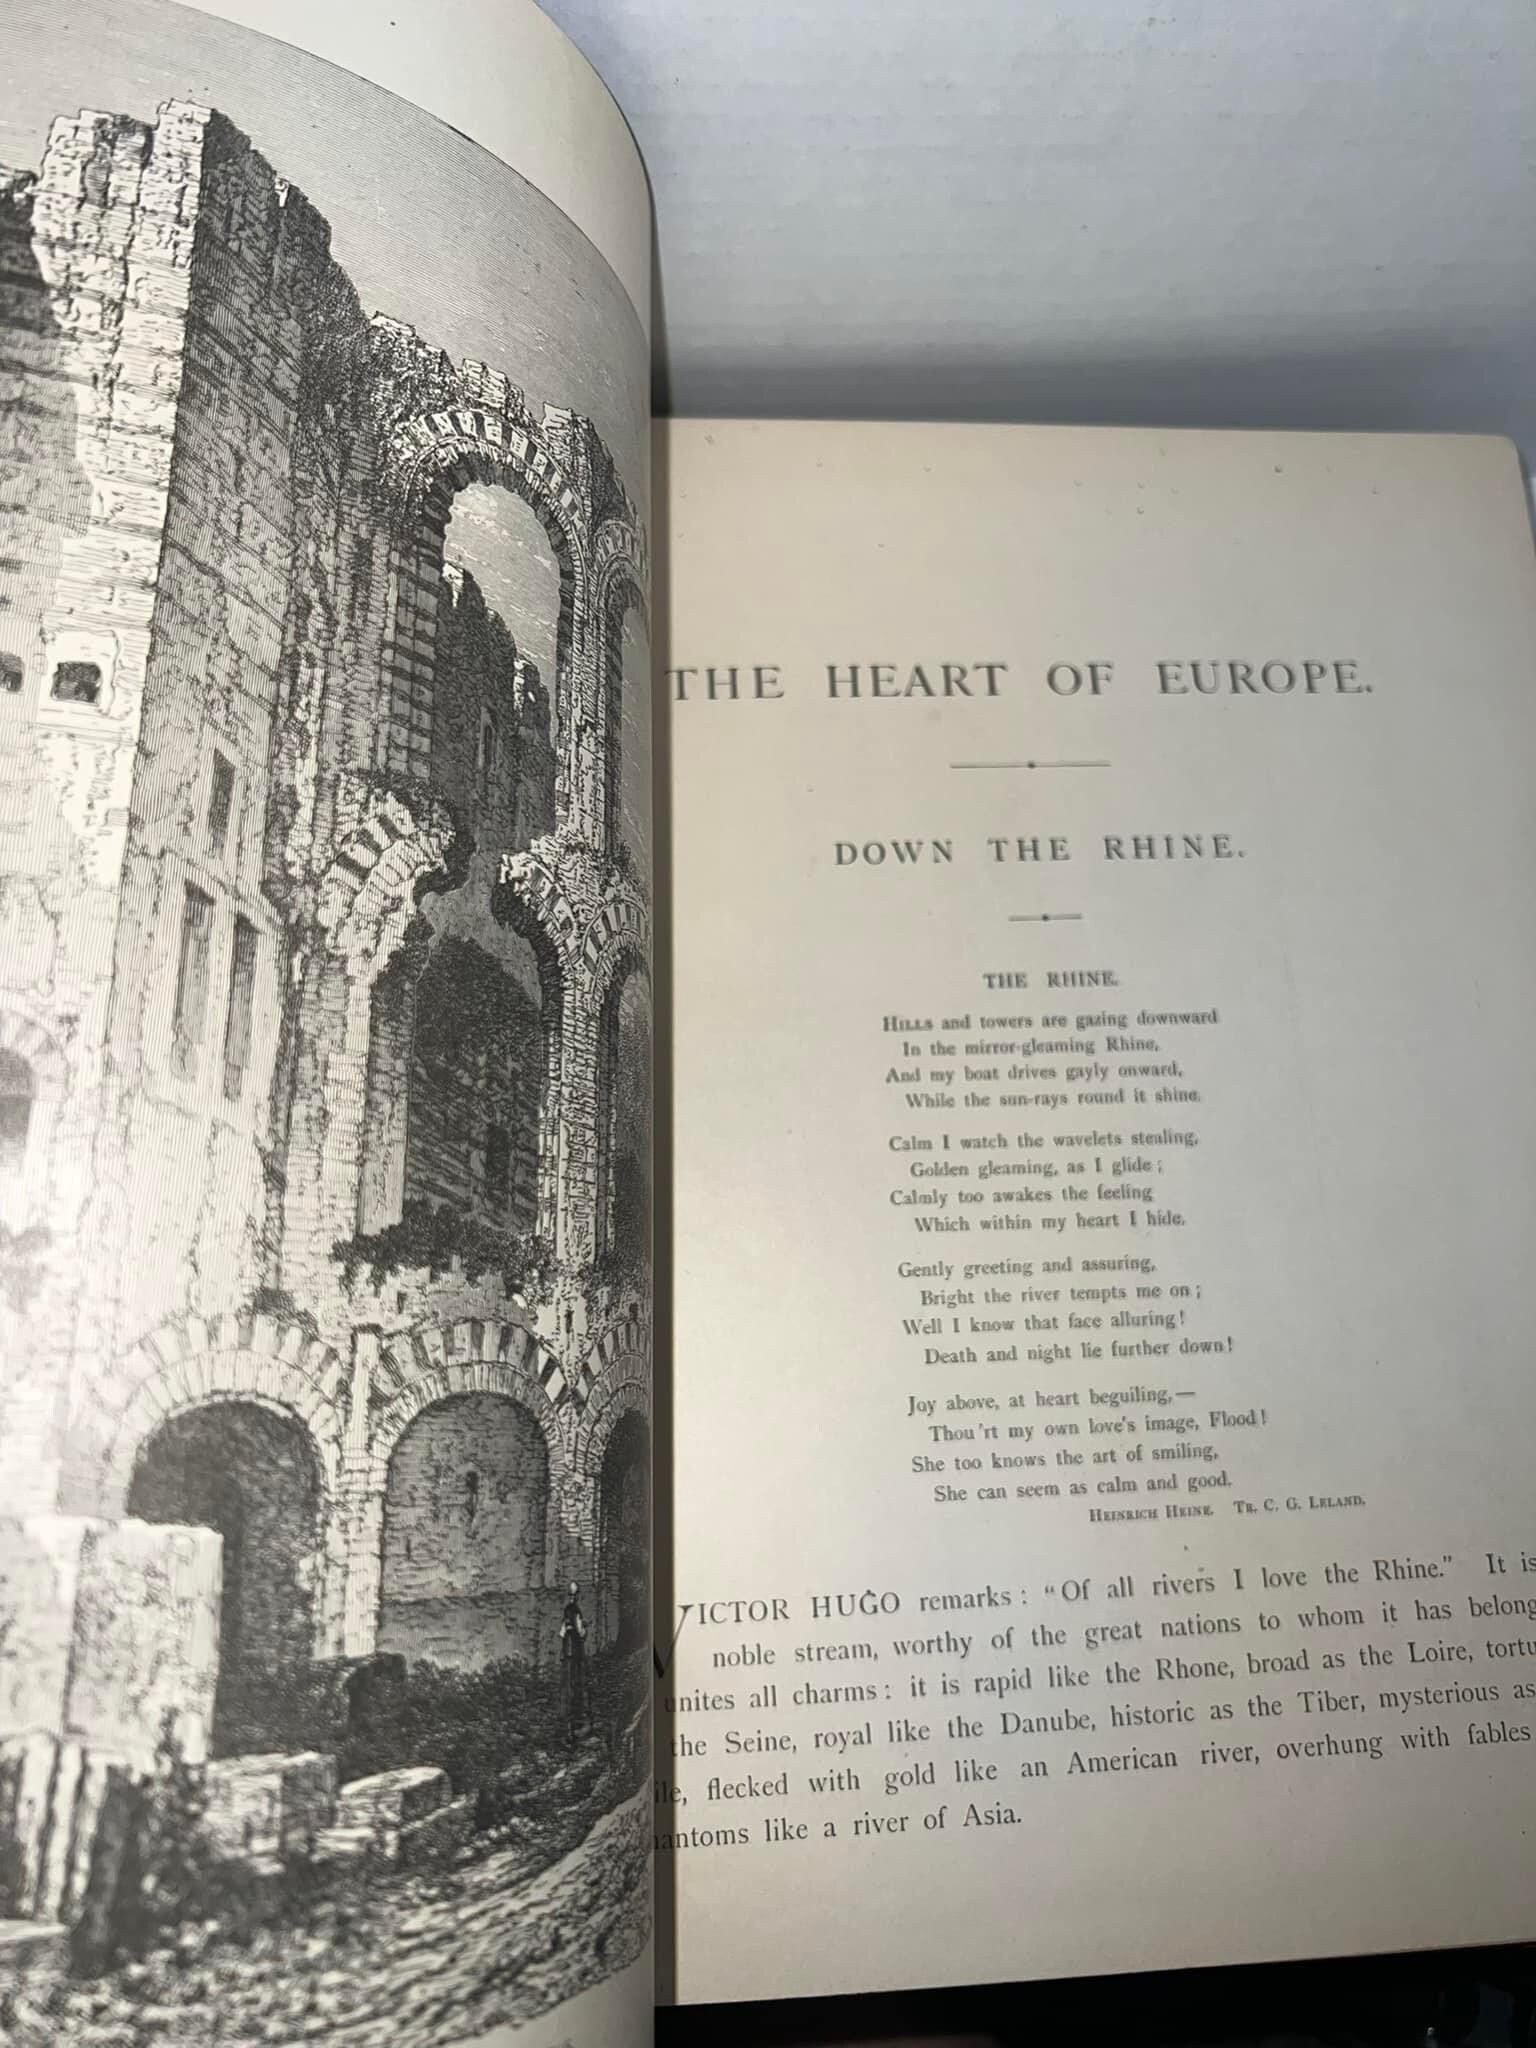 Antique Victorian The heart of Europe From the time to danube- a series of striking and interesting views -1890s